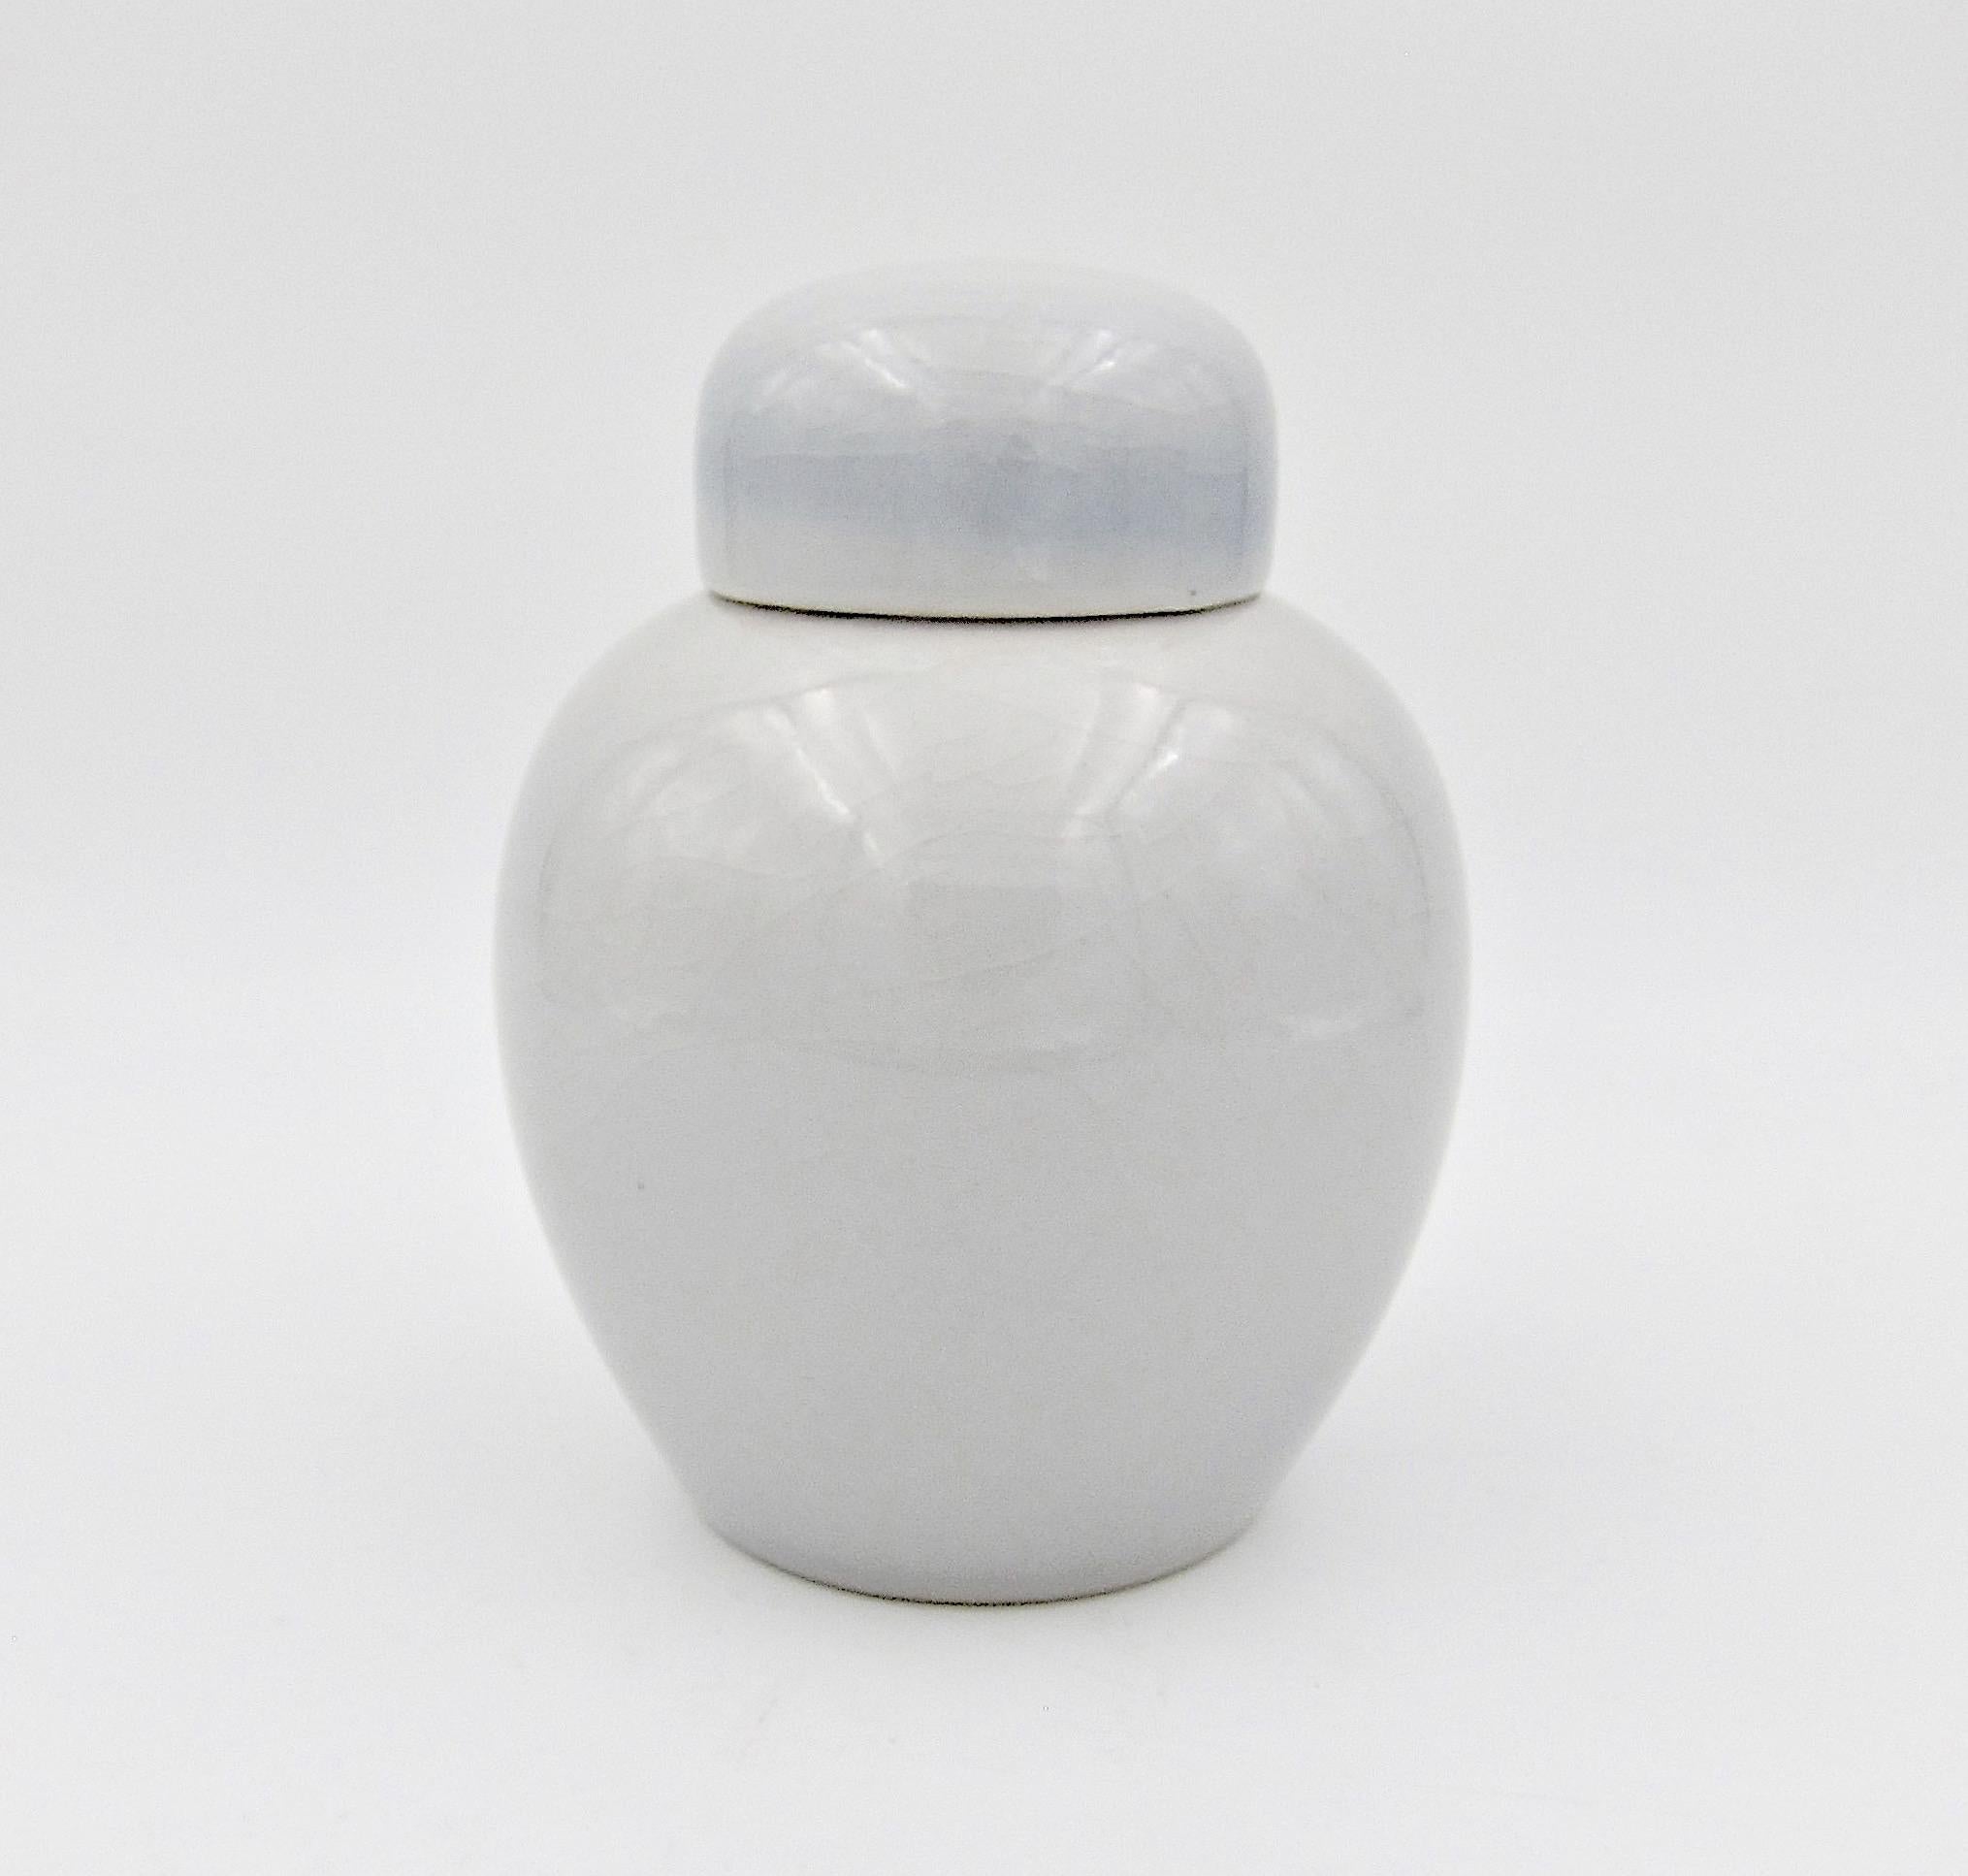 An American porcelain ginger jar by mid-20th century ceramicist Rodney Rouse (1903-1977) of Trenton, New Jersey, dating circa 1965-1970. The lidded vessel is decorated with a crisp, glossy glaze of pale gray with a hint of darker blue-gray